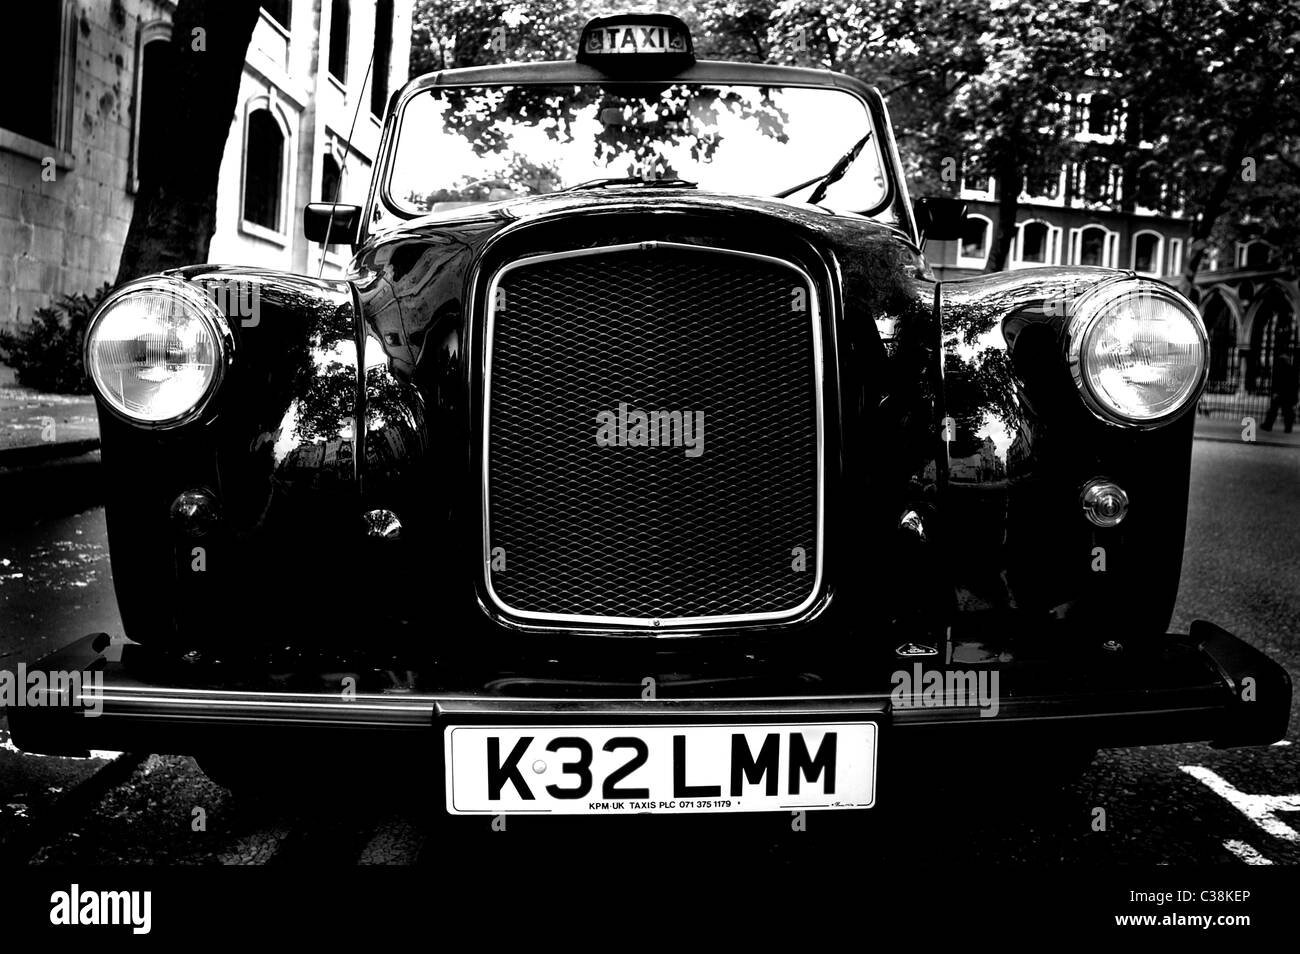 Taxi cab Black and White Stock Photos & Images - Page 3 - Alamy